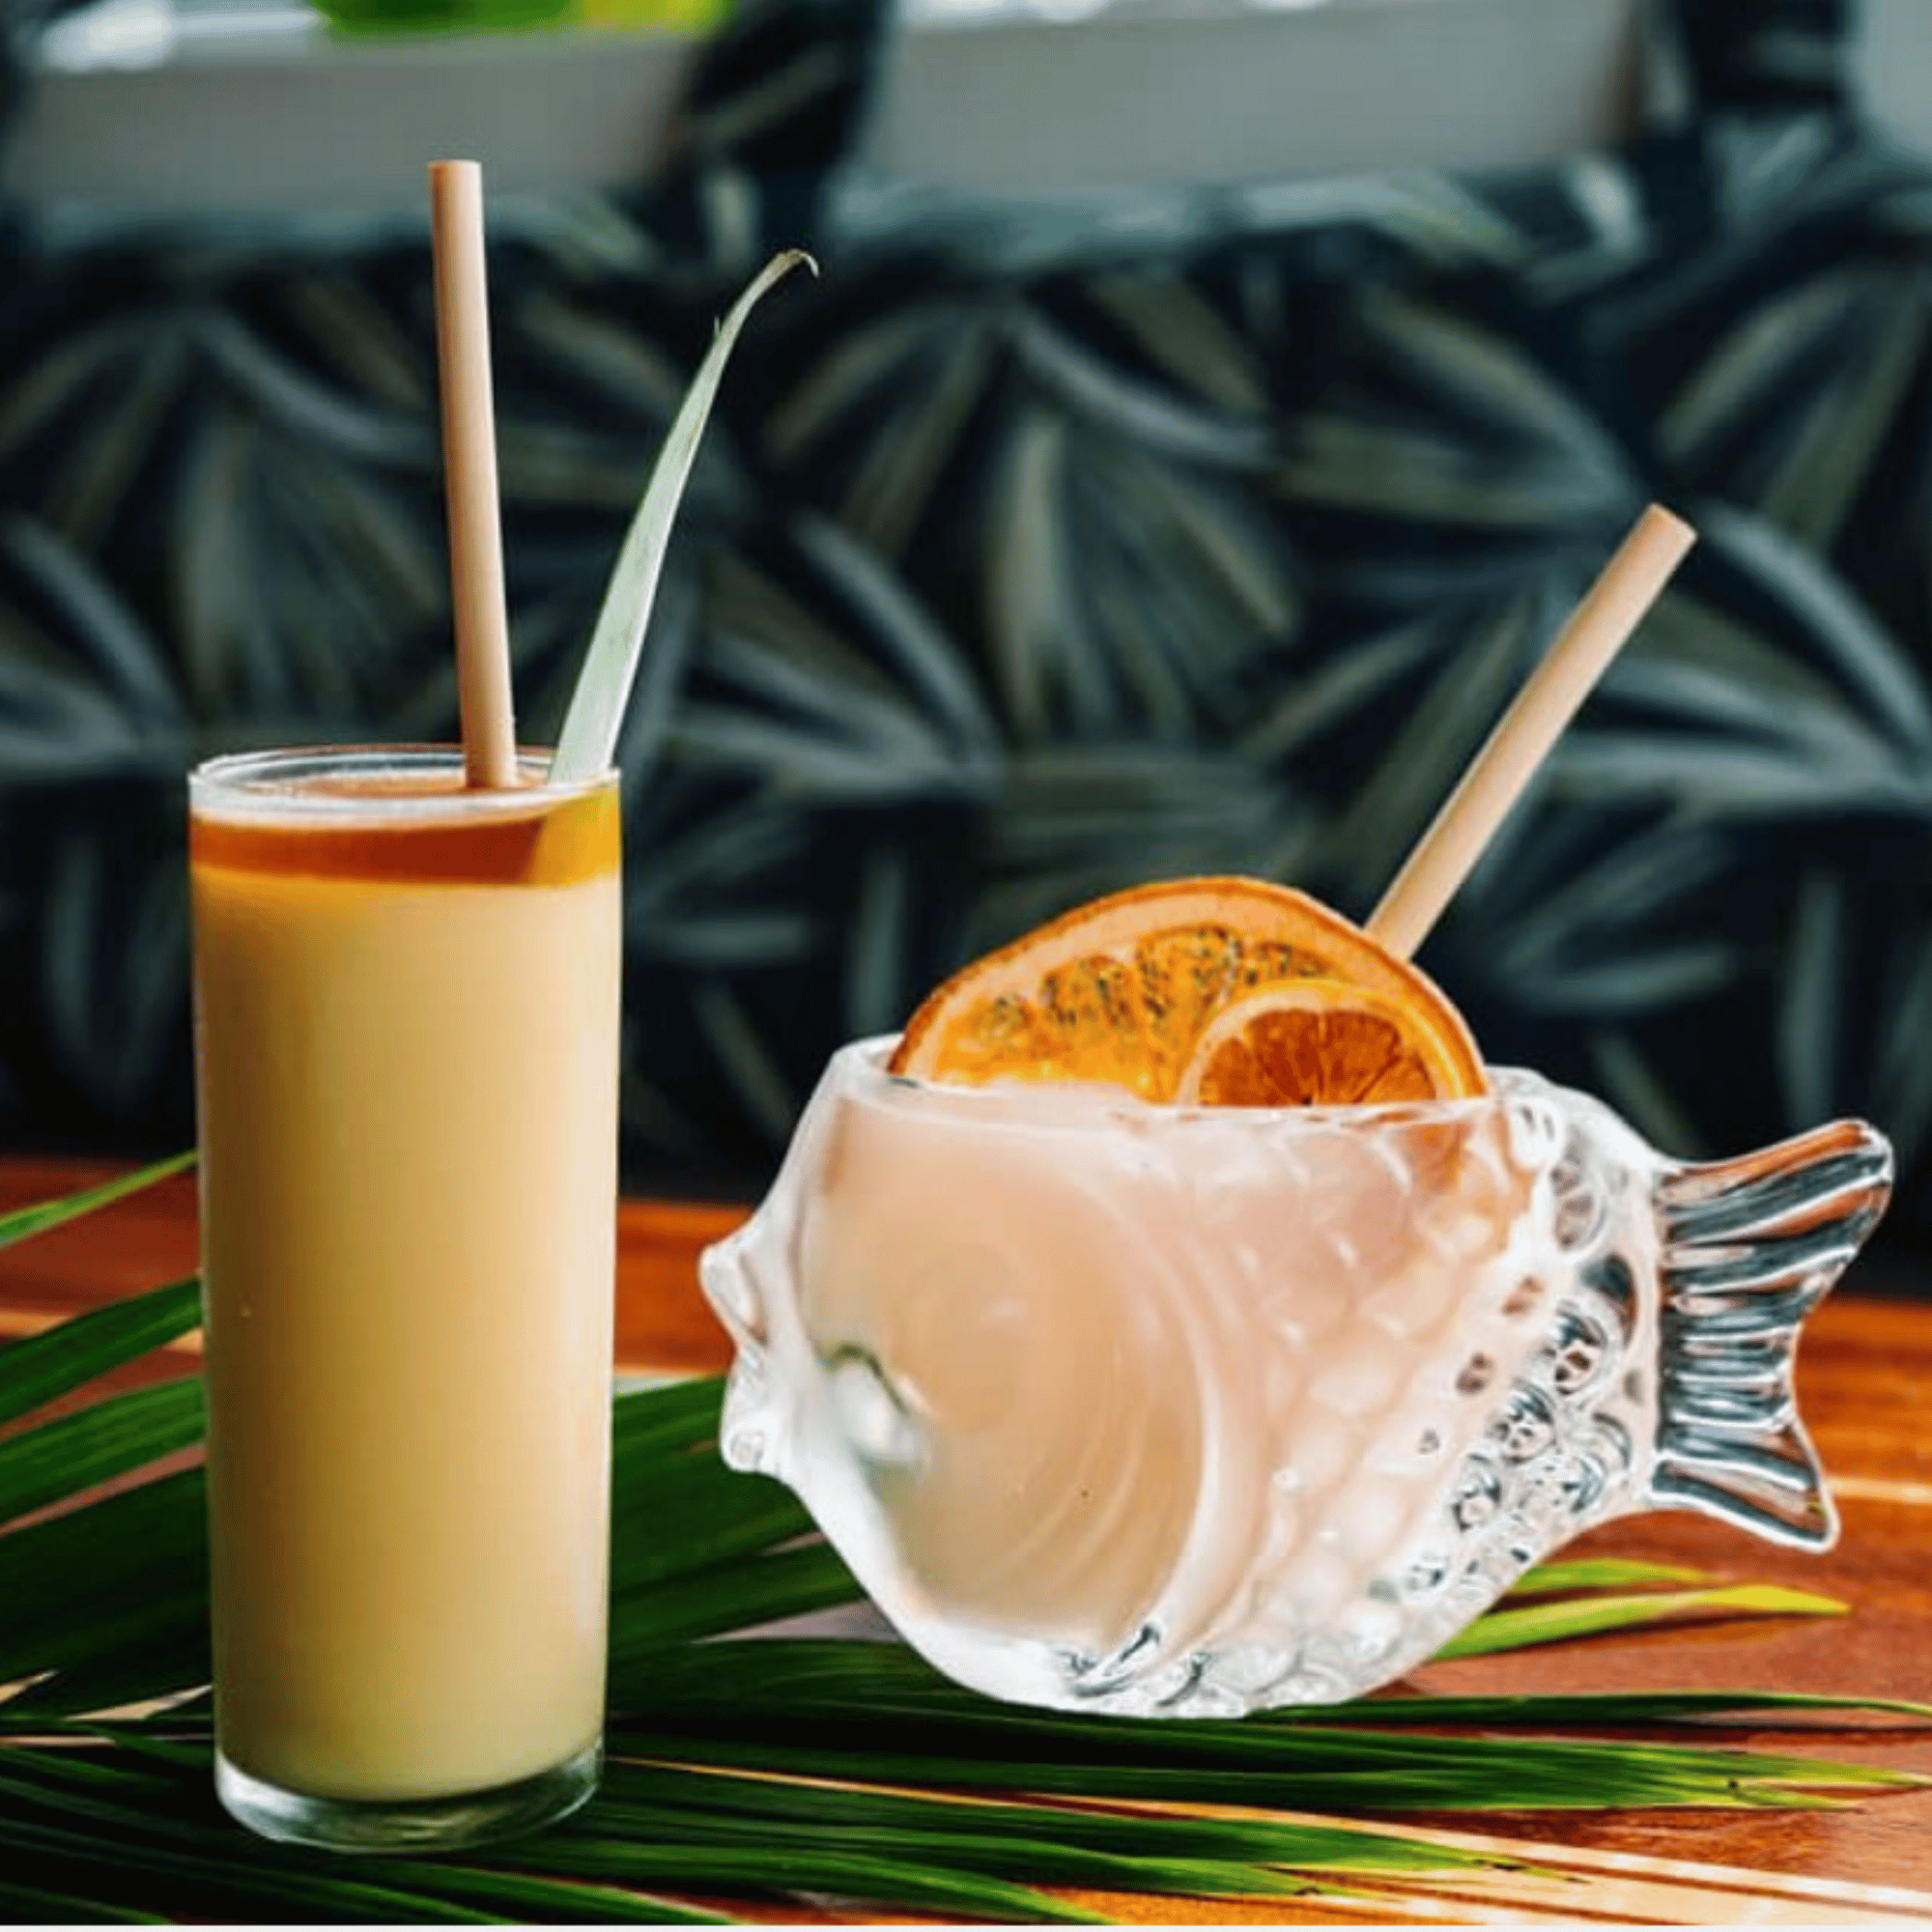 A tall glass of frozen rum drink with a bamboo straw beside a unique fish-shaped glass filled with a creamy pink cocktail, garnished with a dried orange slice, both on a palm leaf against a tropical patterned backdrop